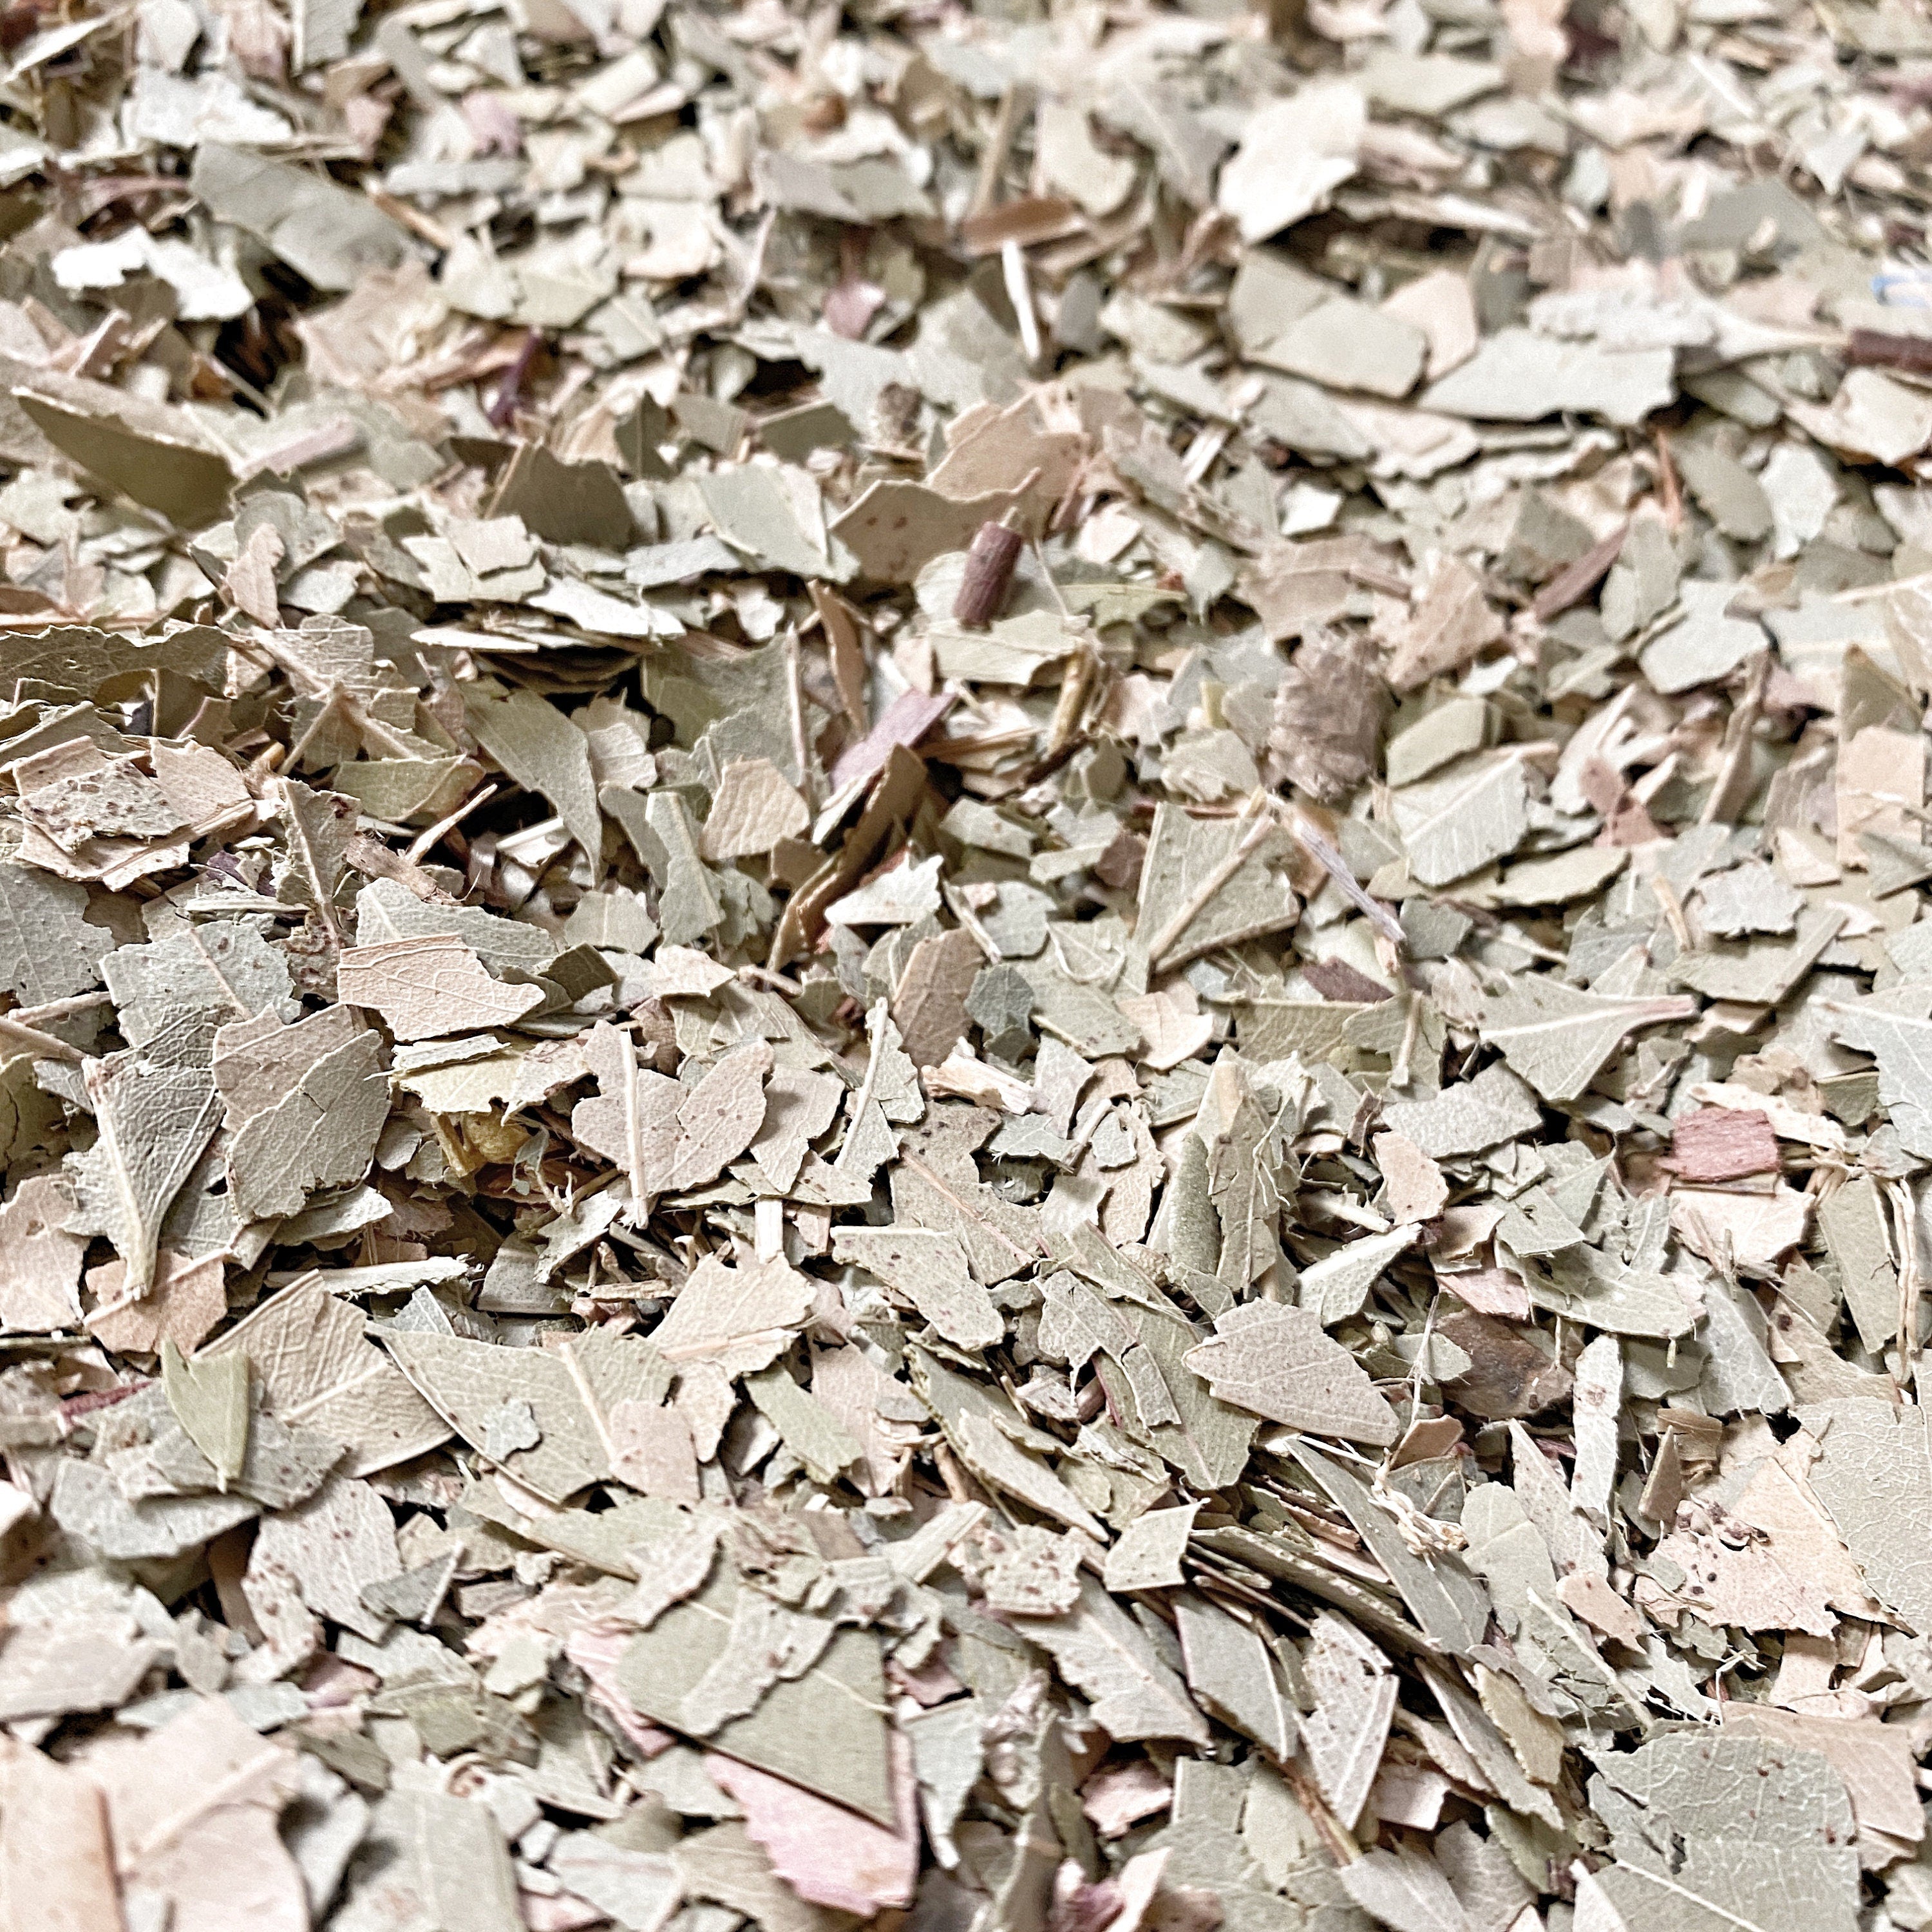 Detail of cut and sifted eucalyptus leaves with a focus on the texture and natural variation in colors from pale green to earthy brown.&quot;